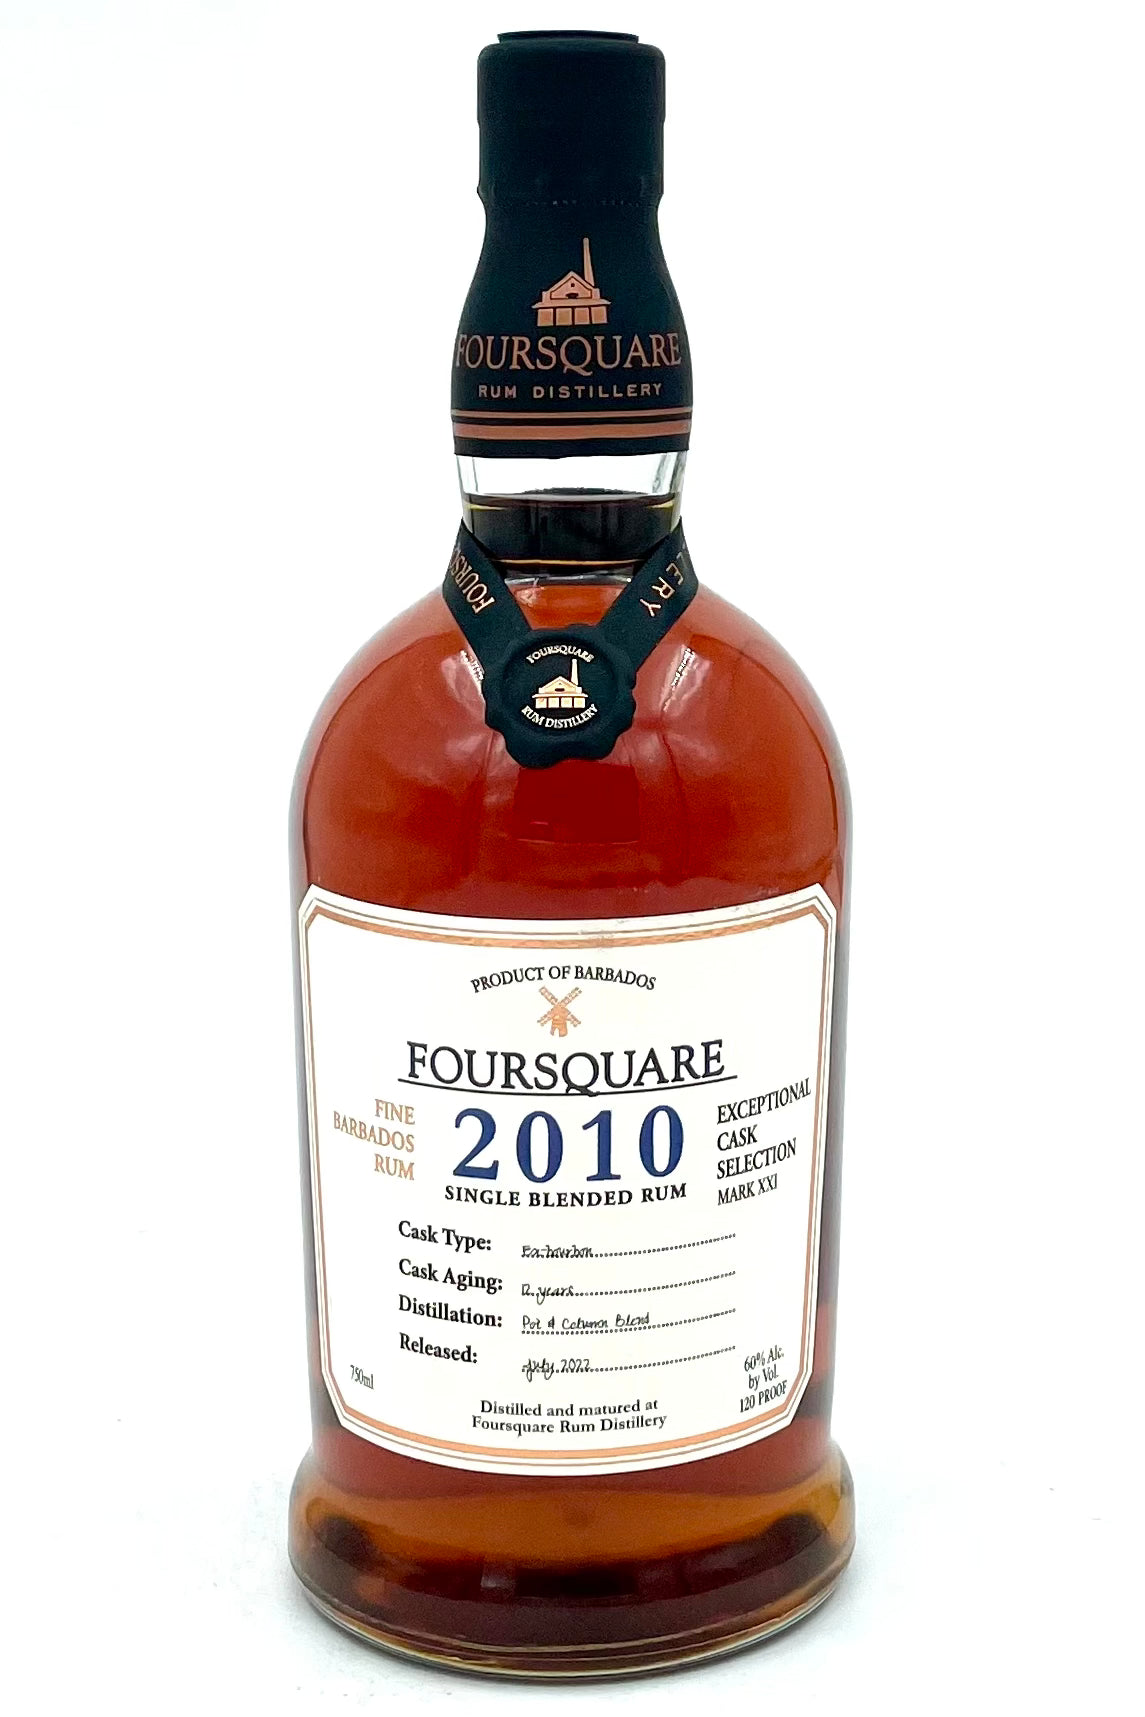 Foursquare Vintage 2010 12 Years Old Exceptional Cask Barbados Rum